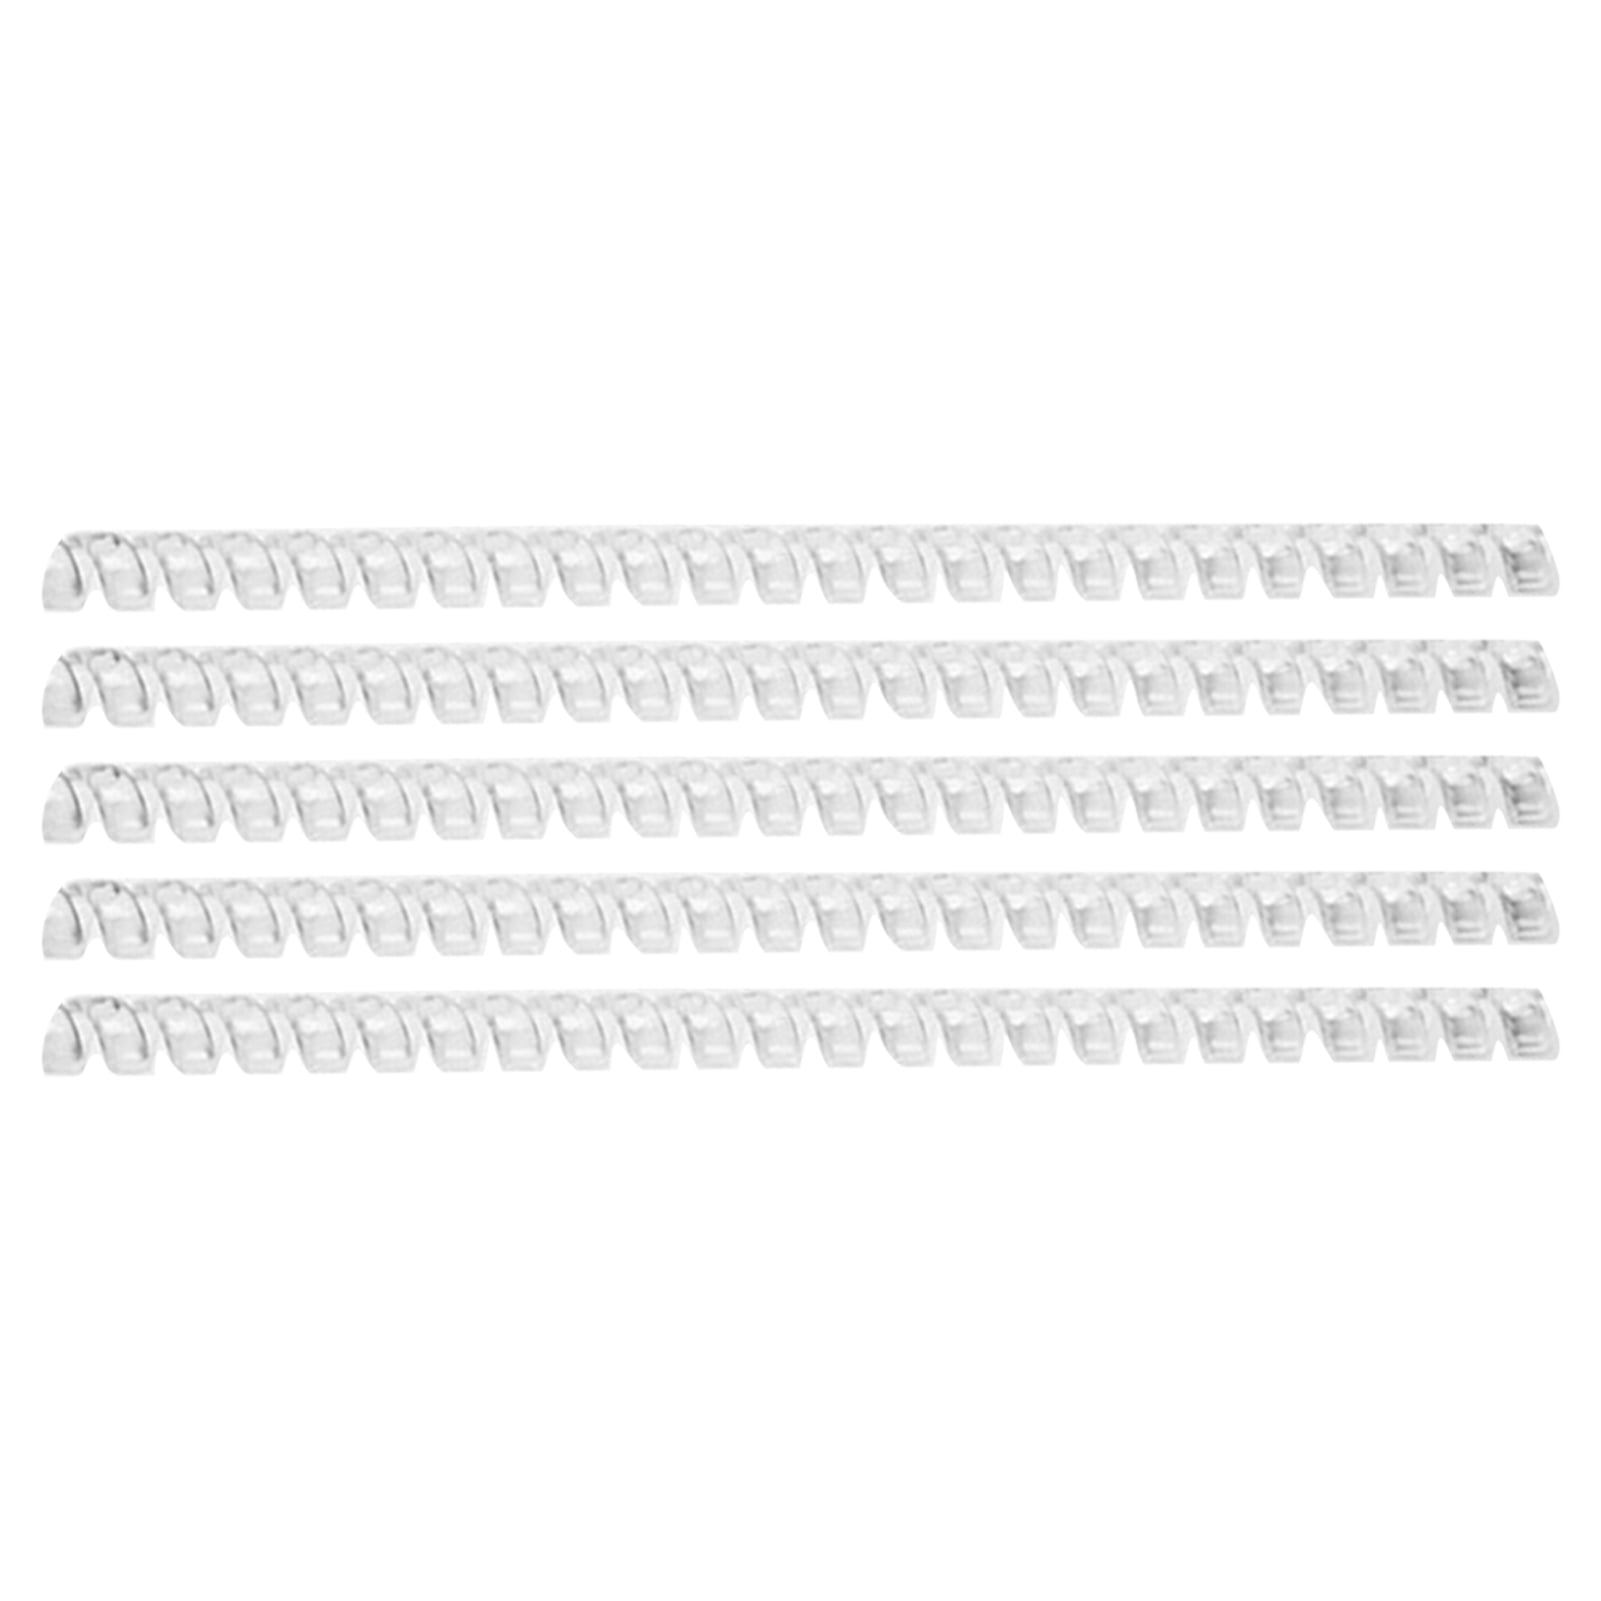 16Pcs/set Transparent Resizer Reducer Guard to Make Jewelry Smaller  Invisible Ring Size Adjuster for Loose Ring Adjuster H8WF